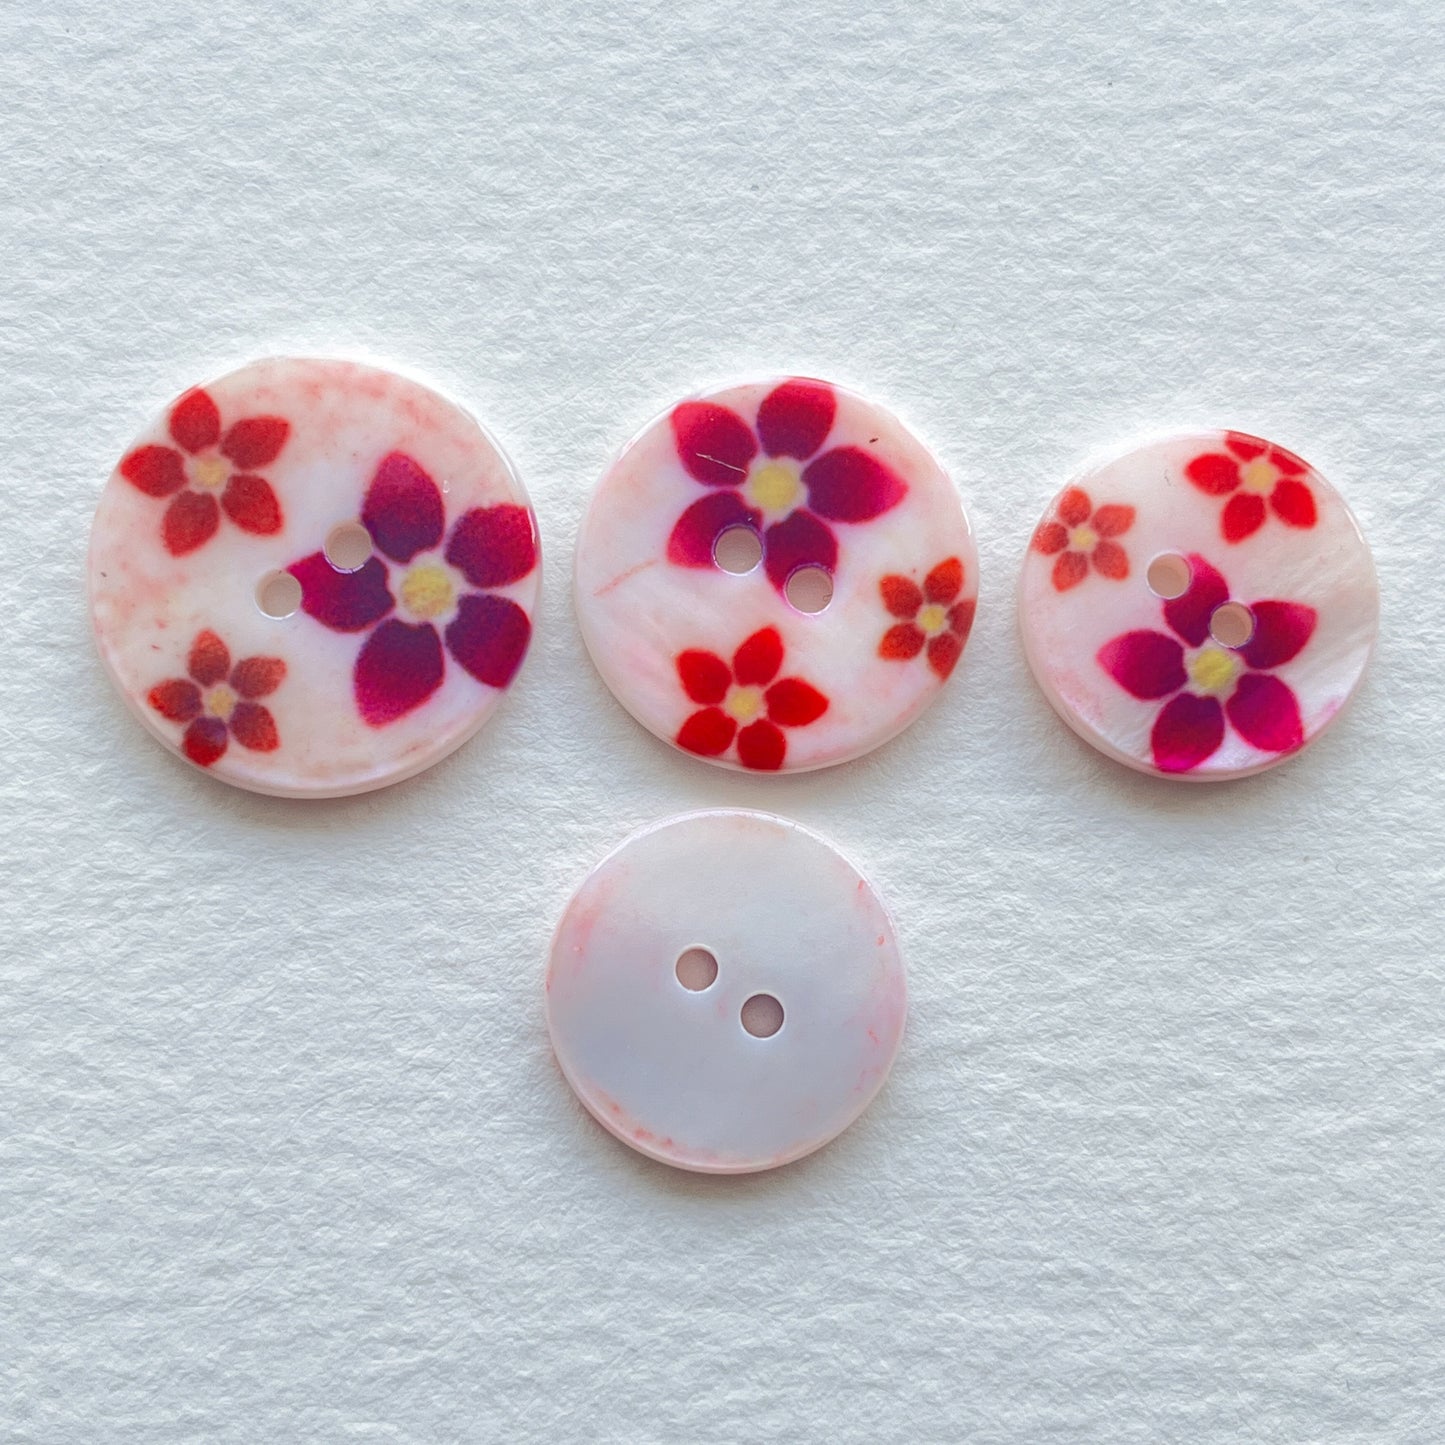 pretty lacquered Agoya shell buttons with floral design in red and pink. Deadstock haberdashery. Choose our range of vintage buttons, trims & sewing accoutrement rescued from a London haberdasher. Sew sustainably.